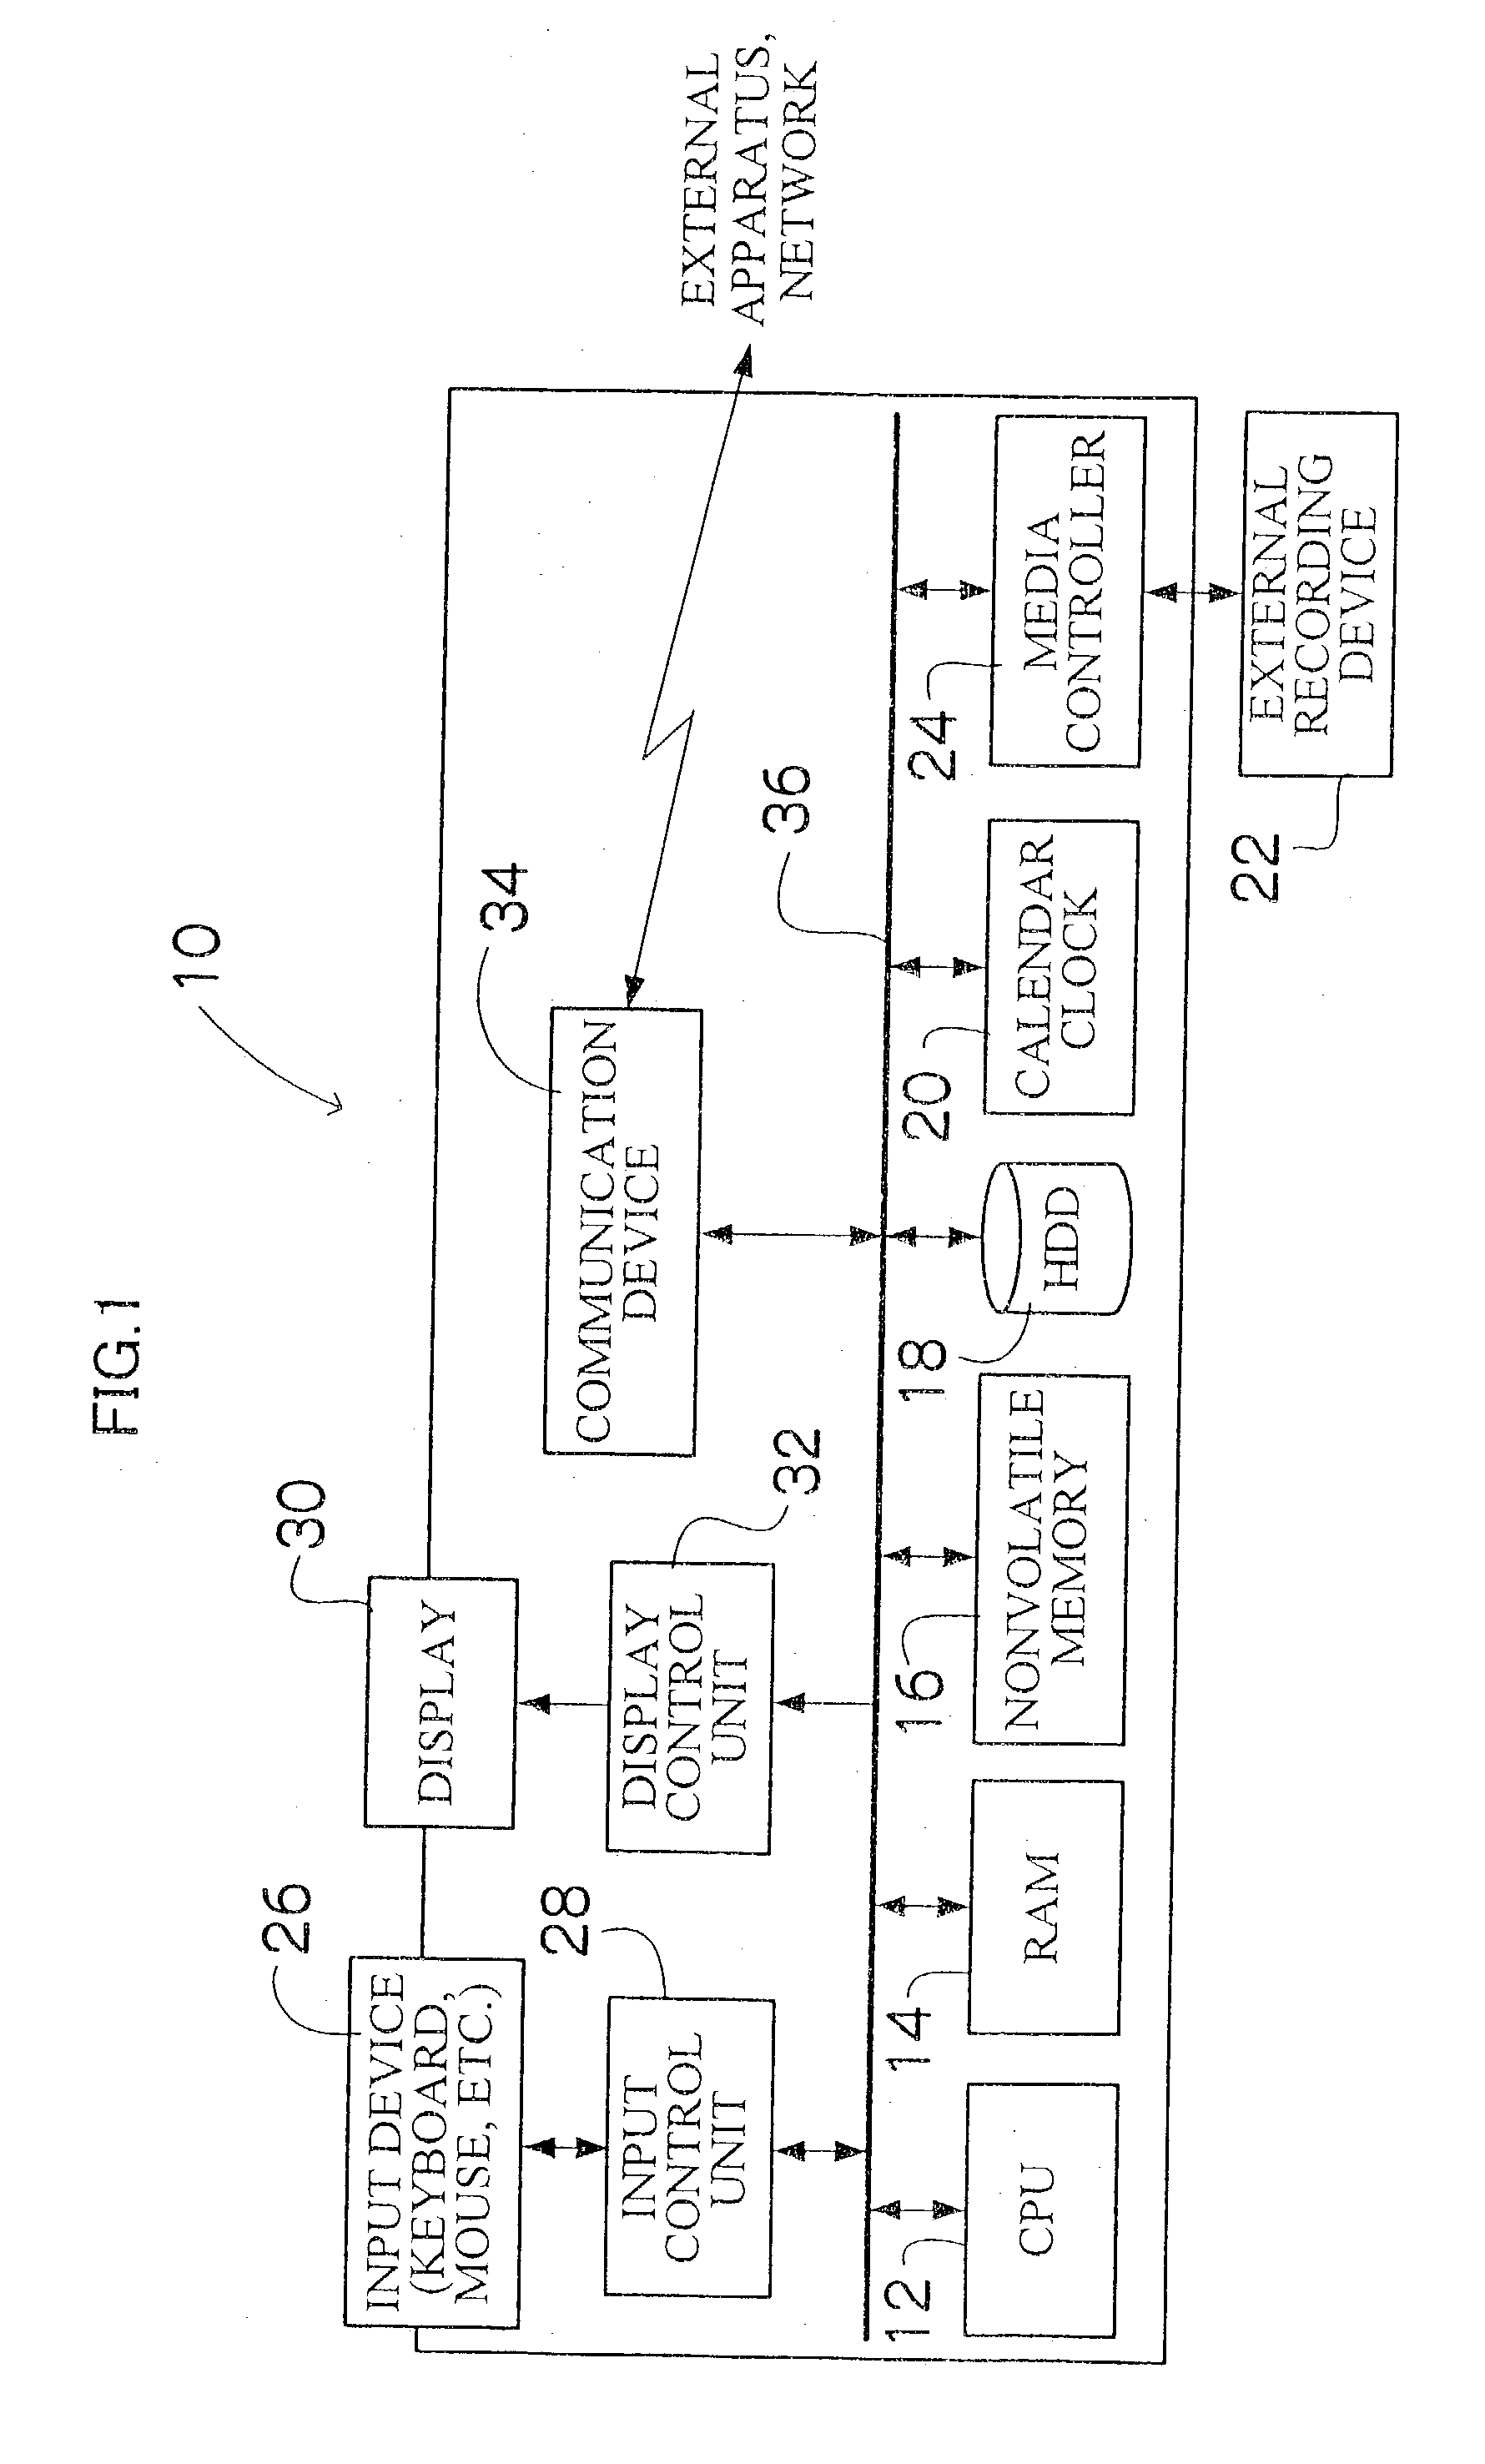 Image display apparatus and method and image management program